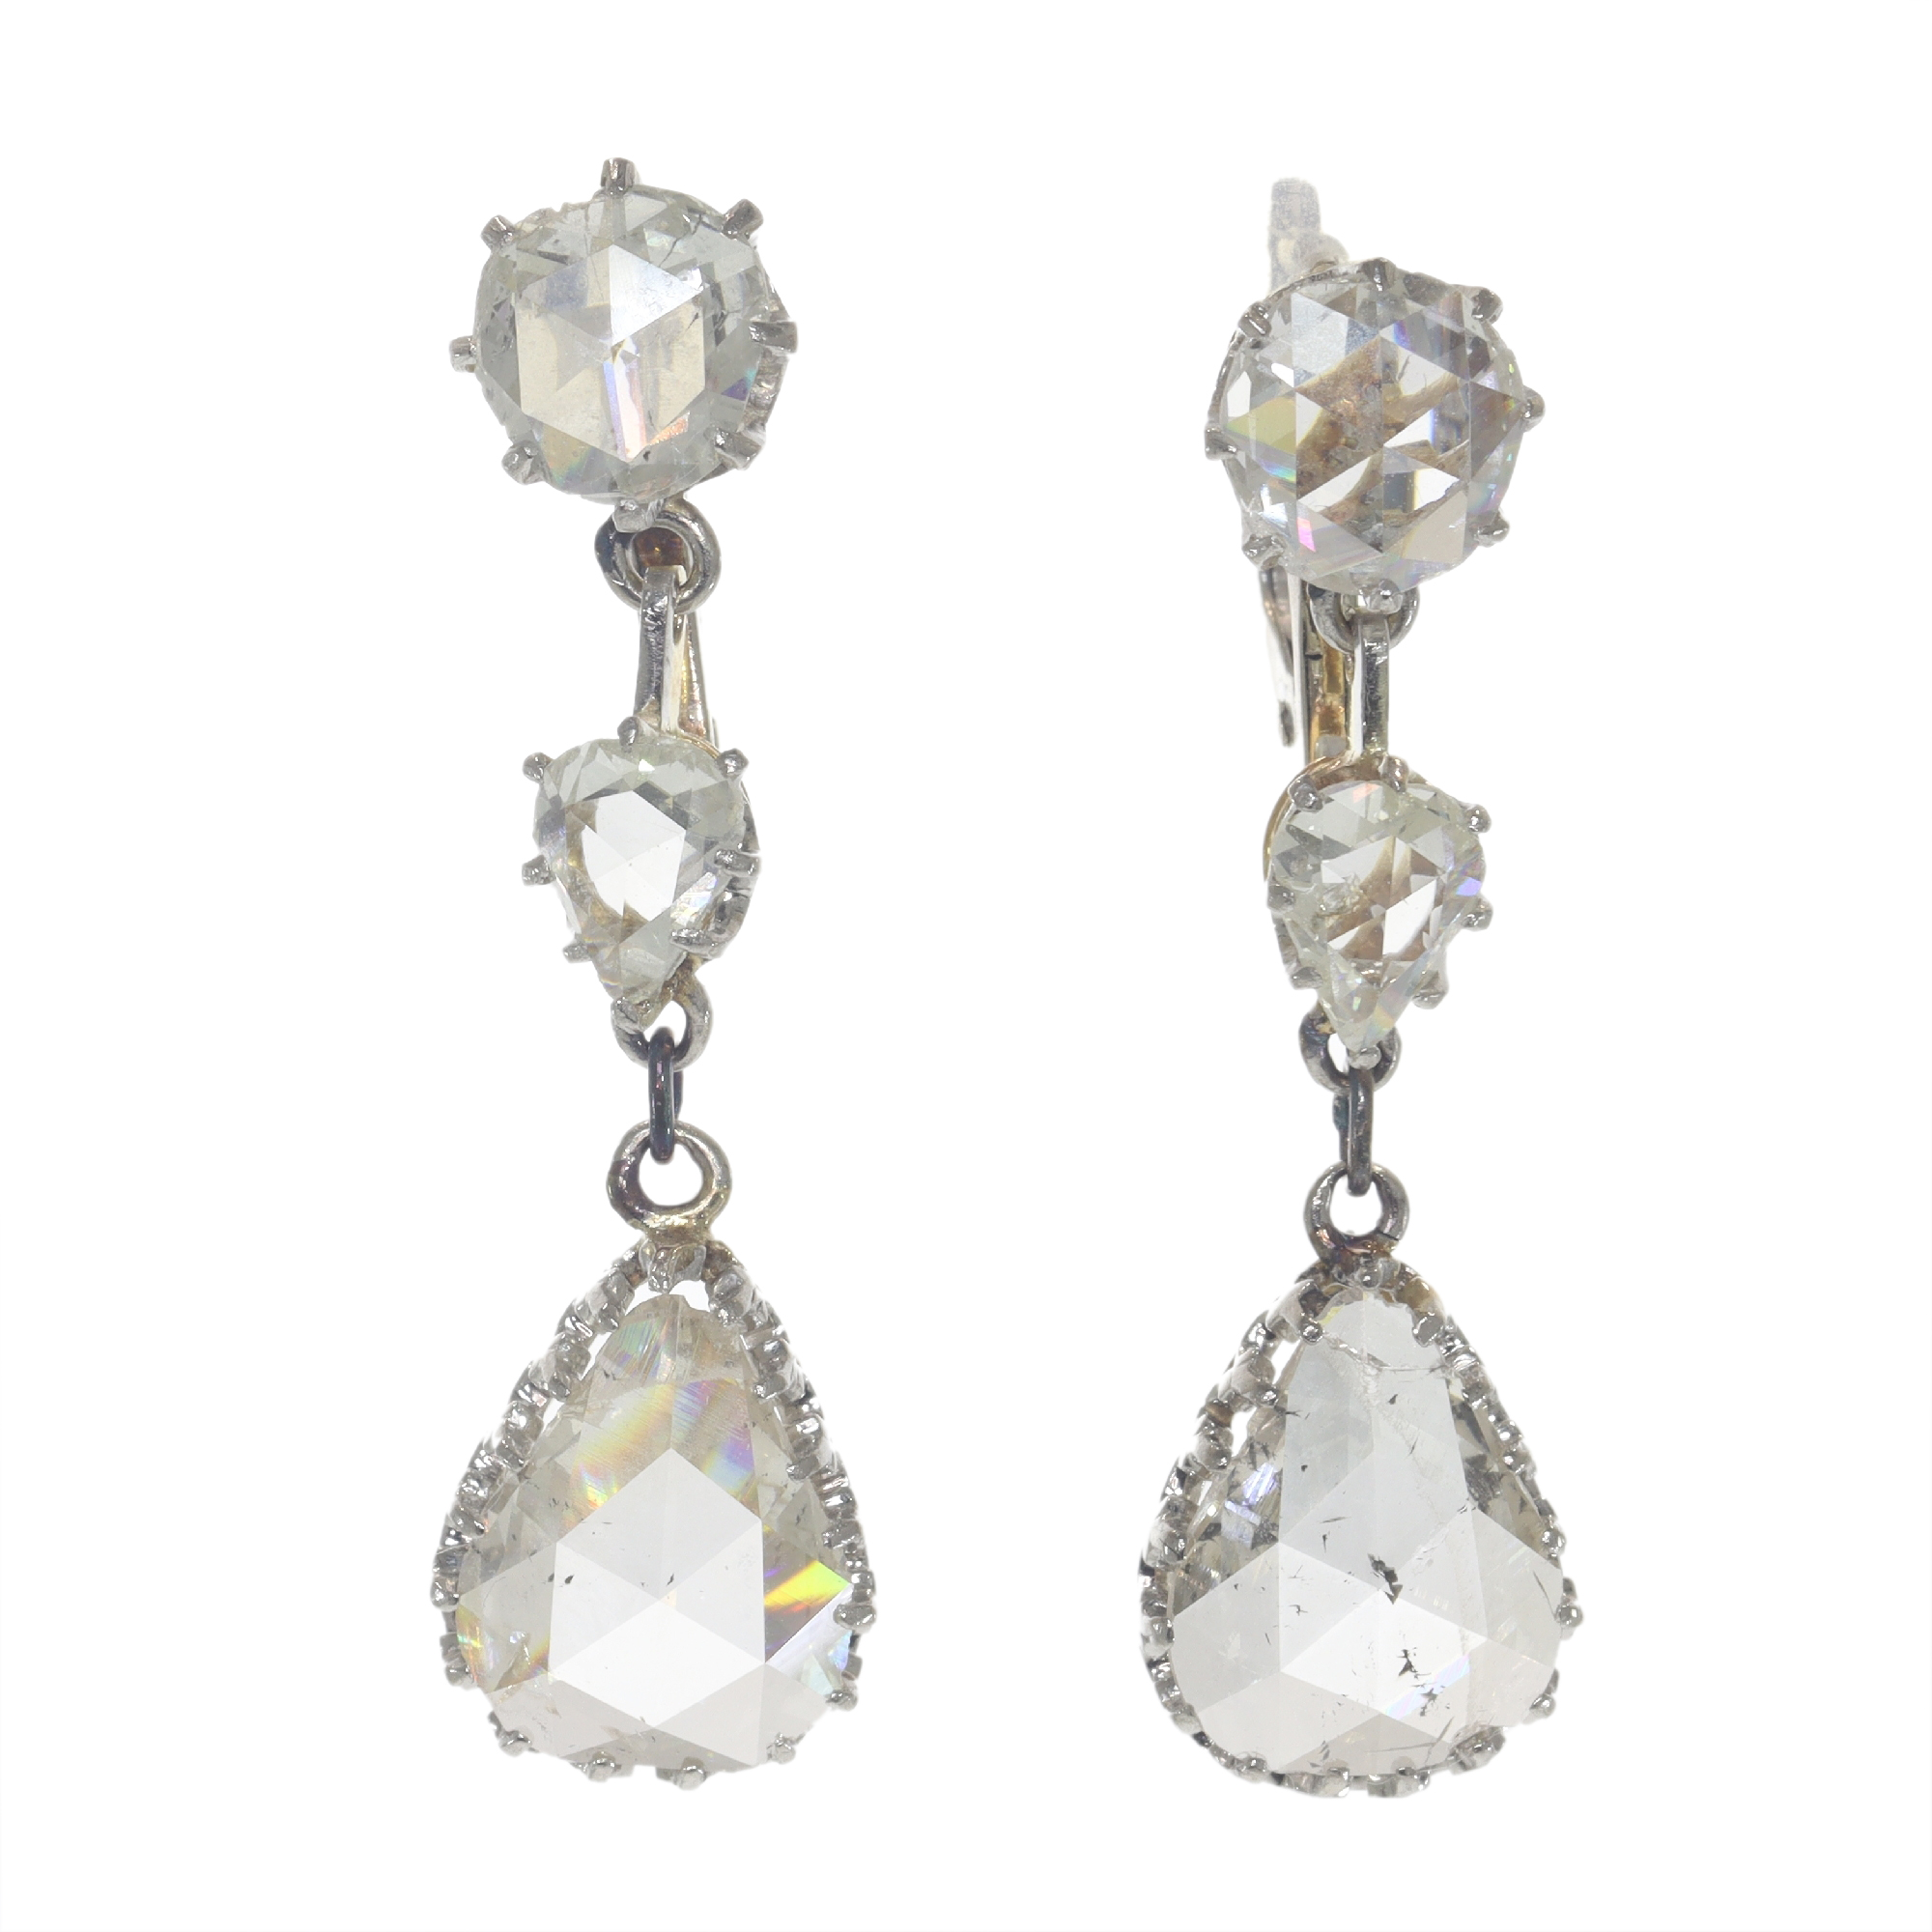 Earrings of Distinction: Belle Époque and Art Deco Fusion with Rose-Cut Diamonds